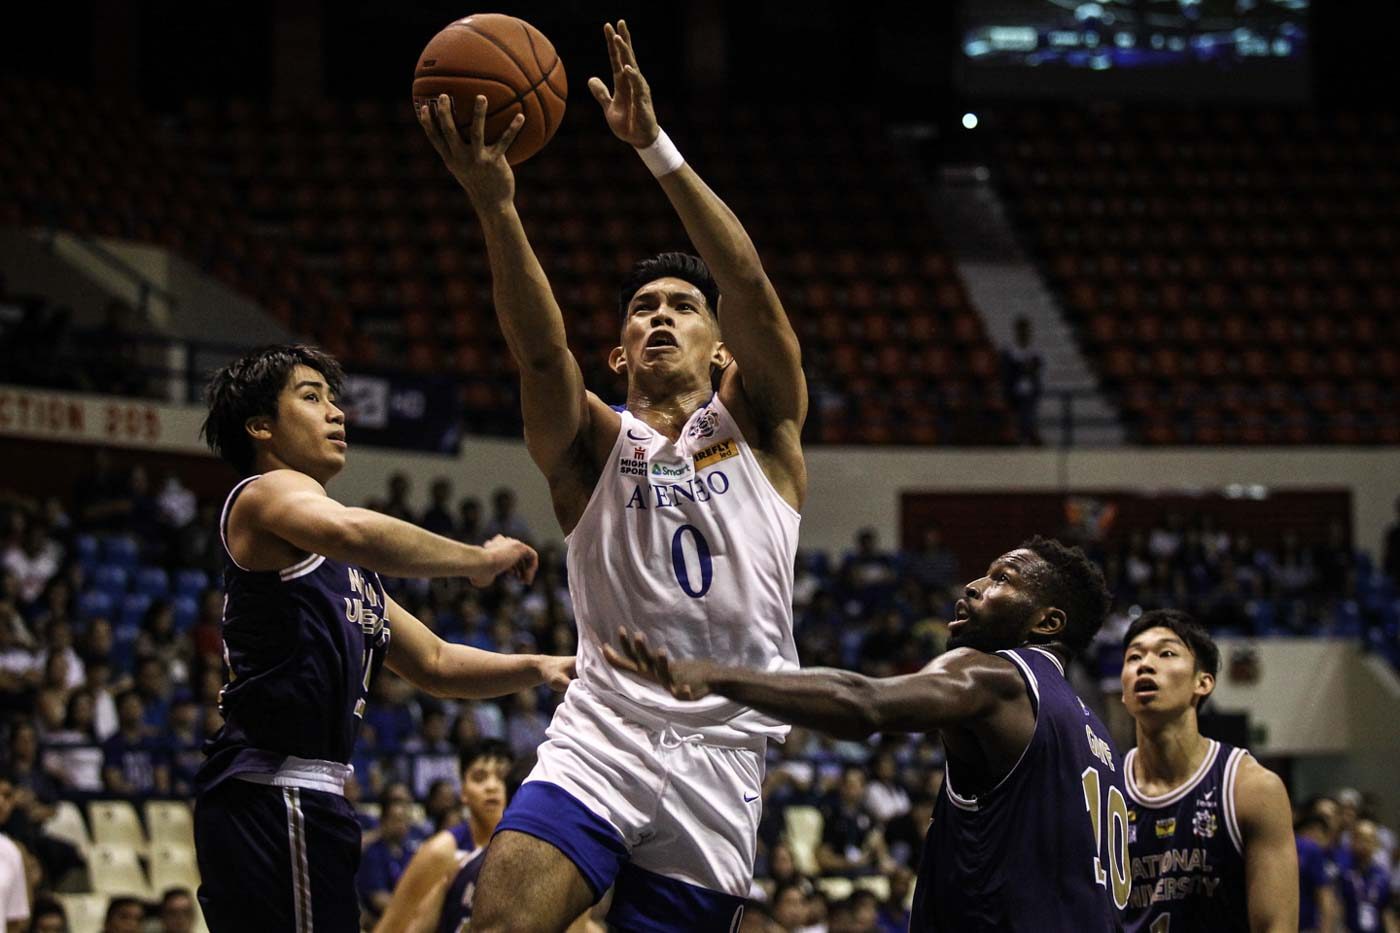 Ateneo manhandles winless NU for 5th straight win